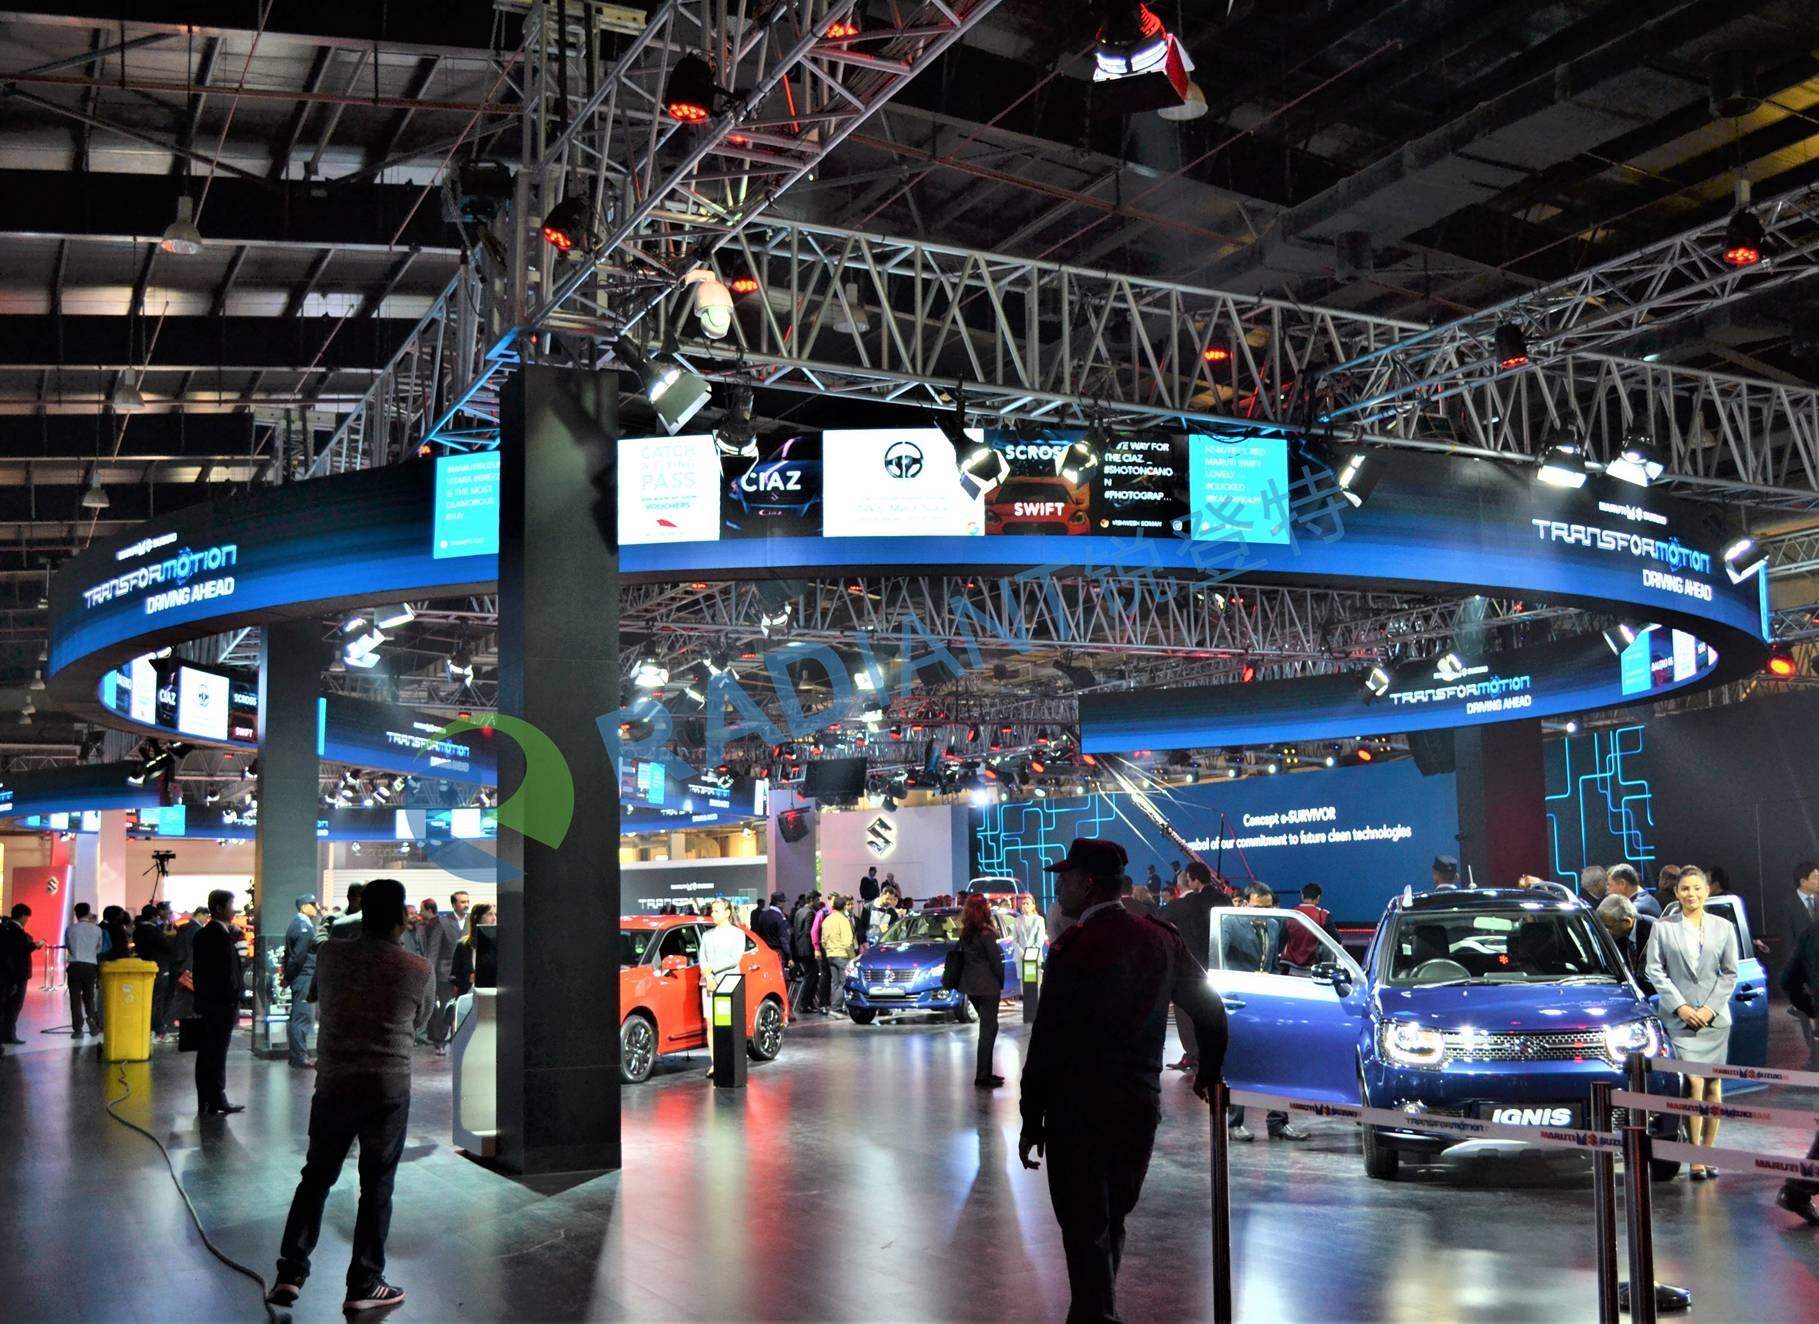 p4 flexible led screen for Exhibition; Round led screen for 4S Car shop